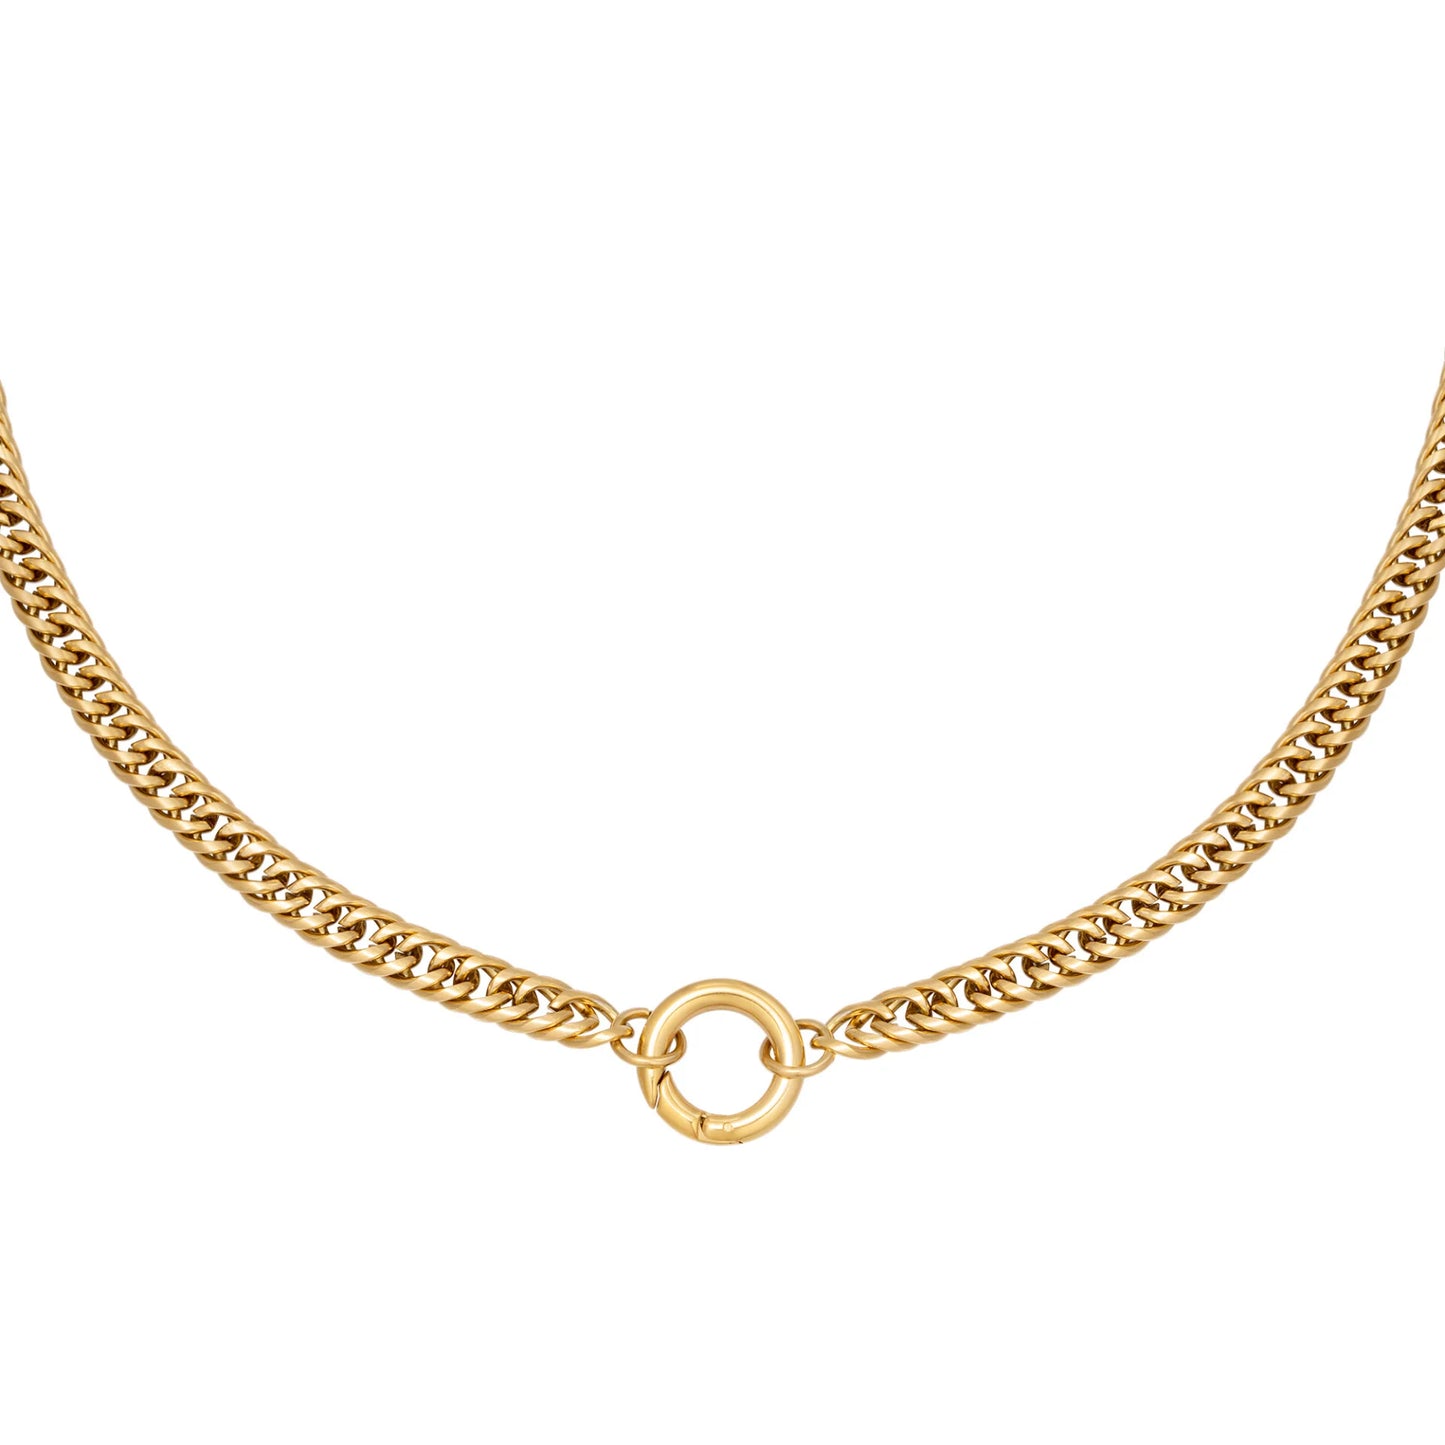 NECKLACE GOLD - KETTING